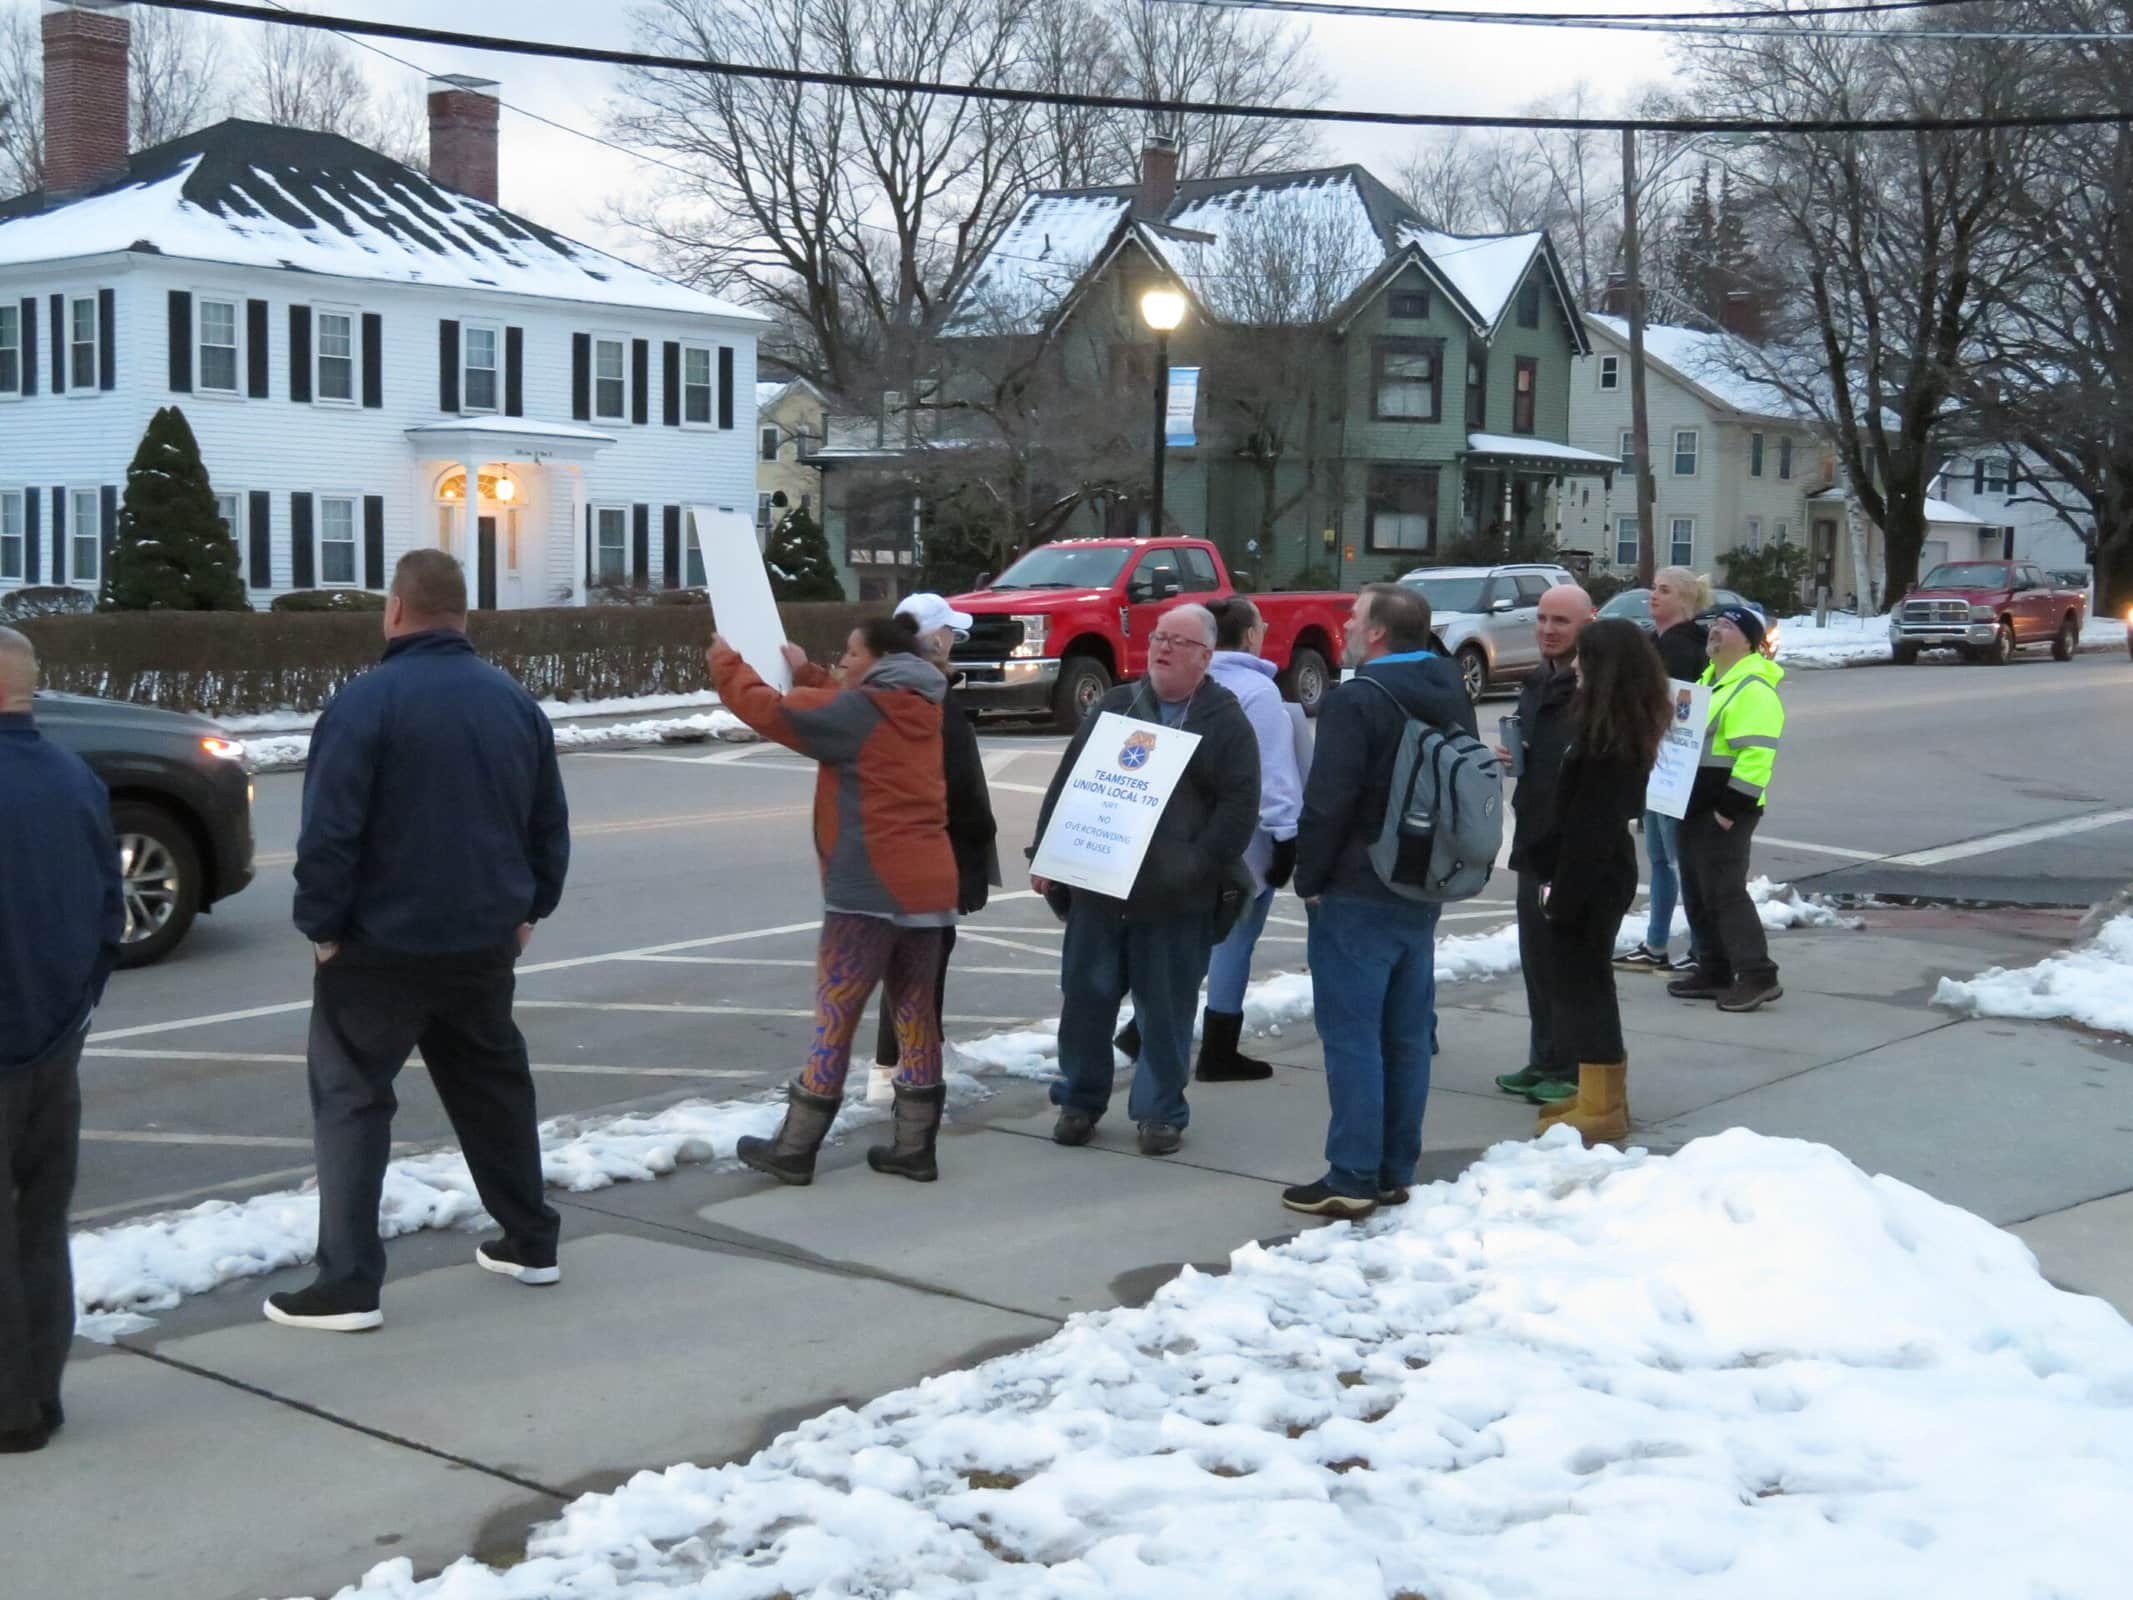 Bus drivers stage informational picket over stalled contract